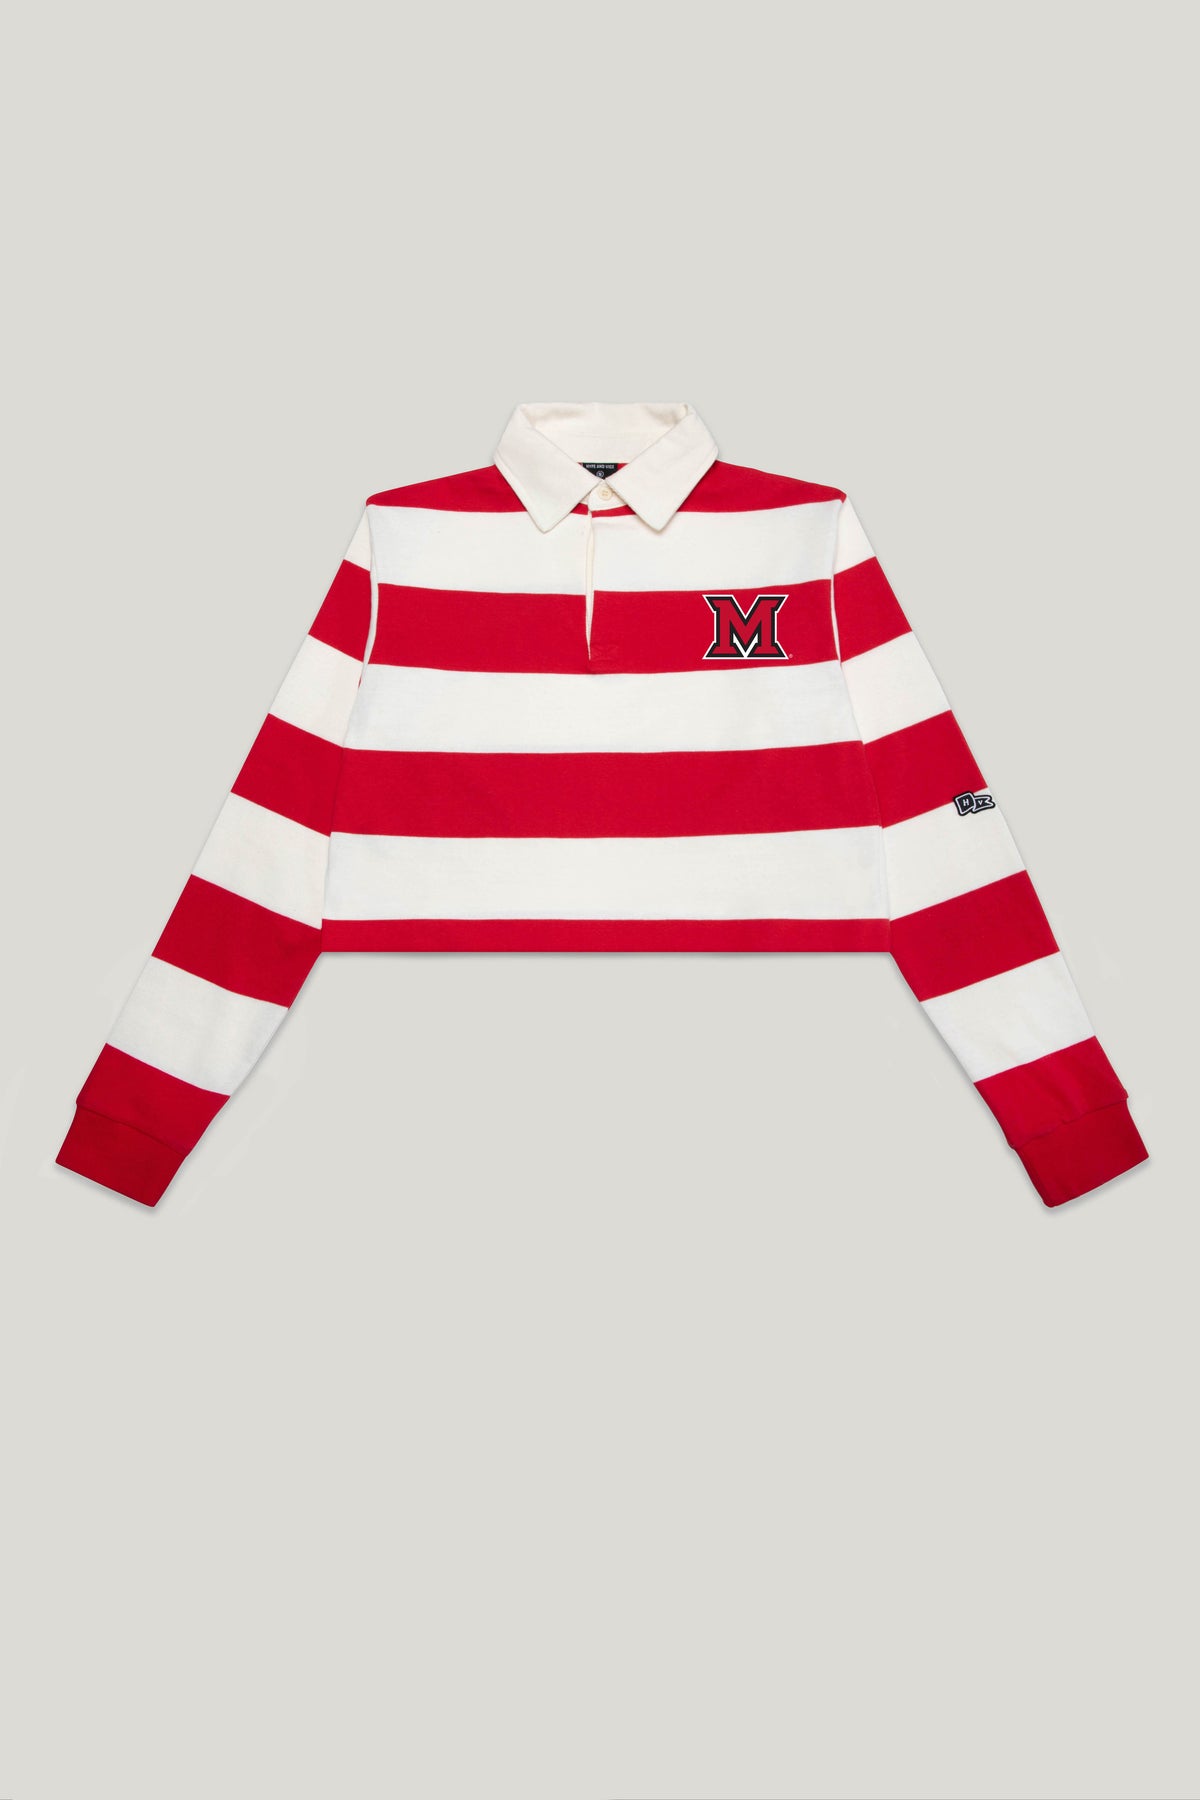 Miami University Rugby Top